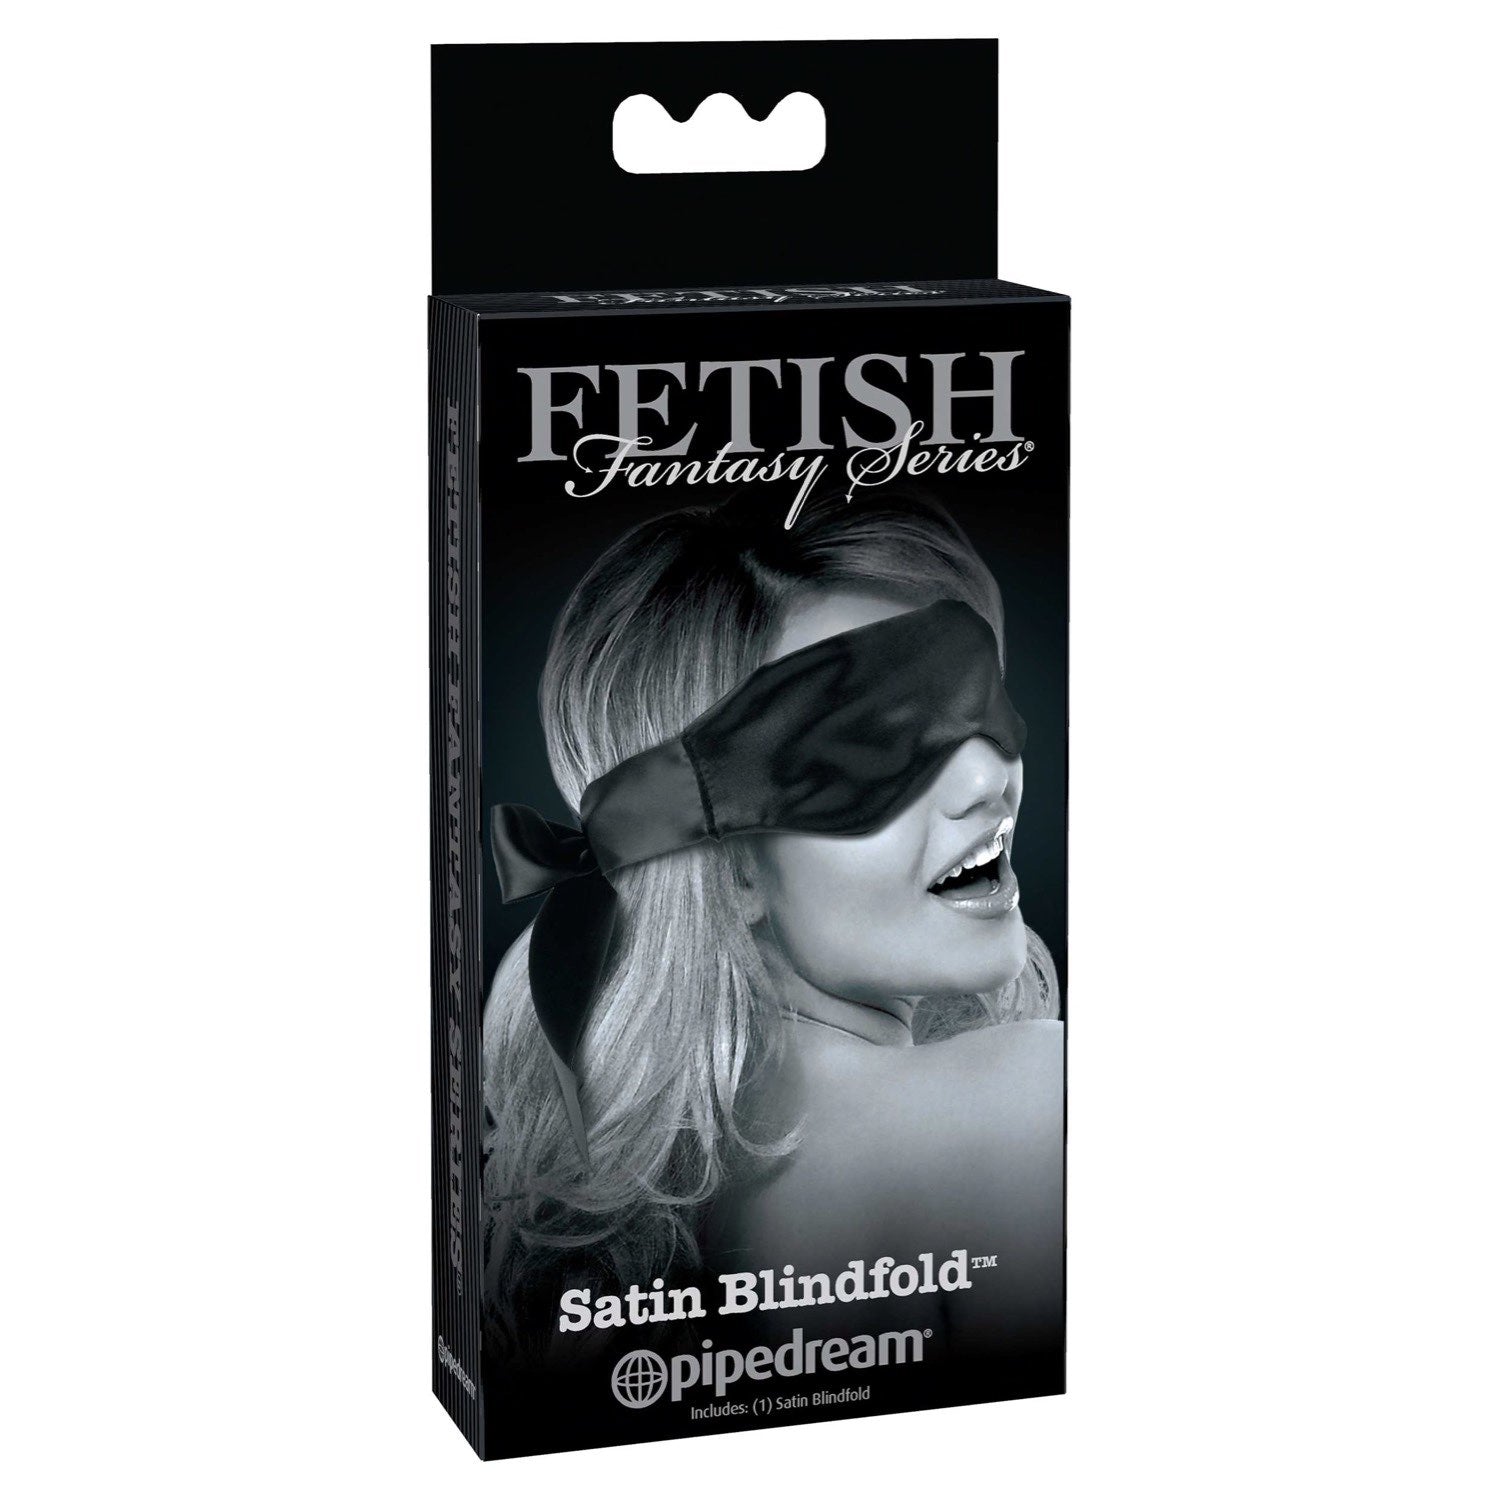 Fetish Fantasy Series Limited Edition Satin Blindfold - Black Eye Restraint by Pipedream